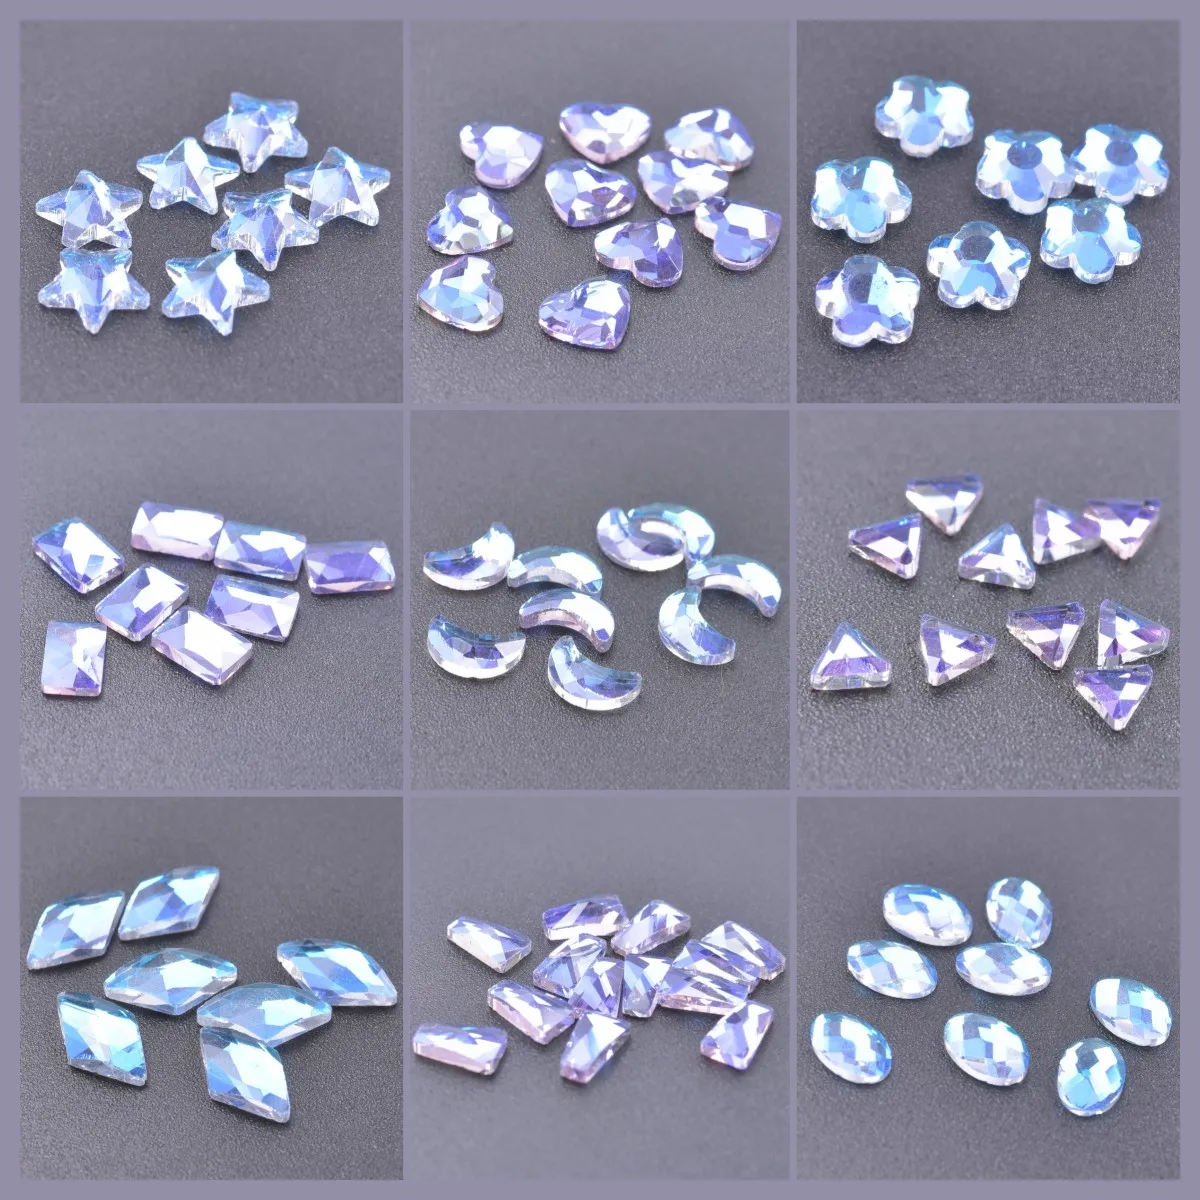 

20Pcs Mixed Rhinestone Crystal Floating Charm Fit Glass Memory Relicario Locket Jewelry Accessories Nail 3D Glitter Decorations